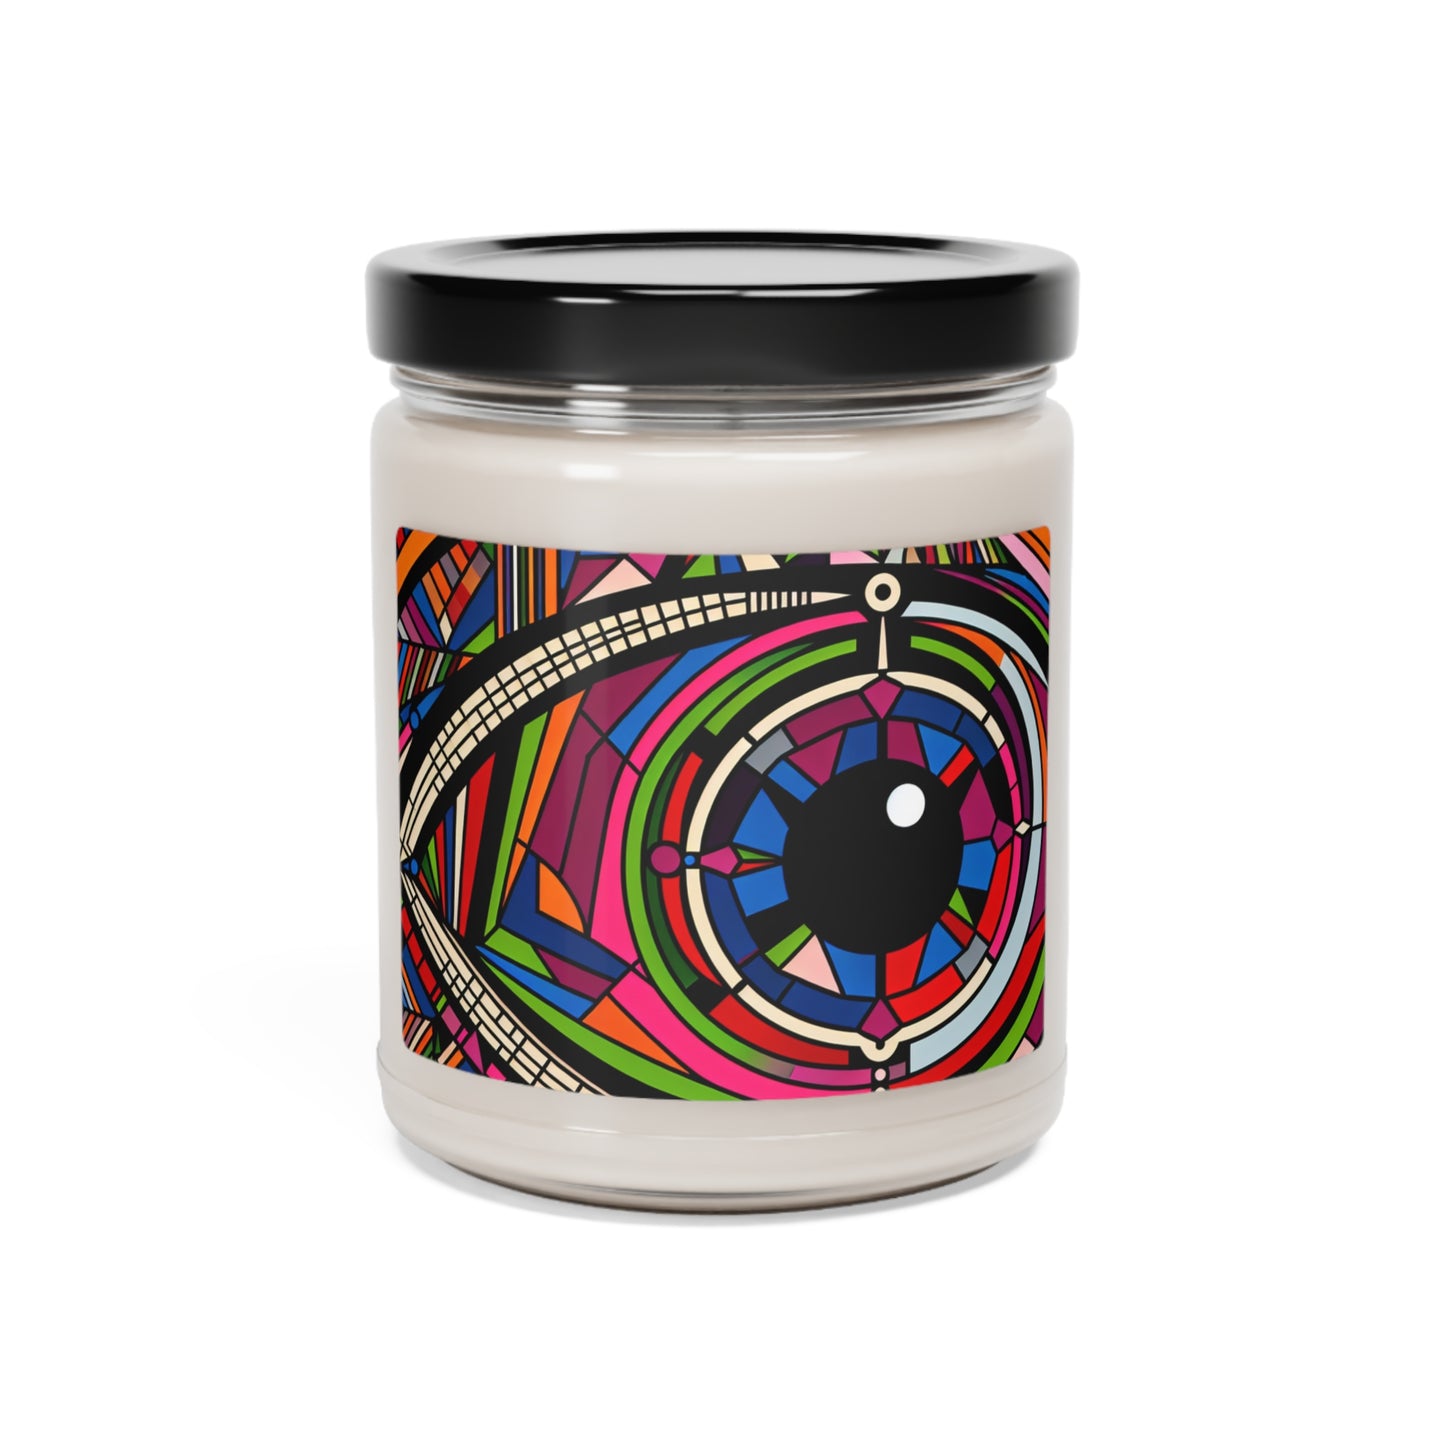 "Eye of the Illusionist". - The Alien Scented Soy Candle 9oz Op Art Style